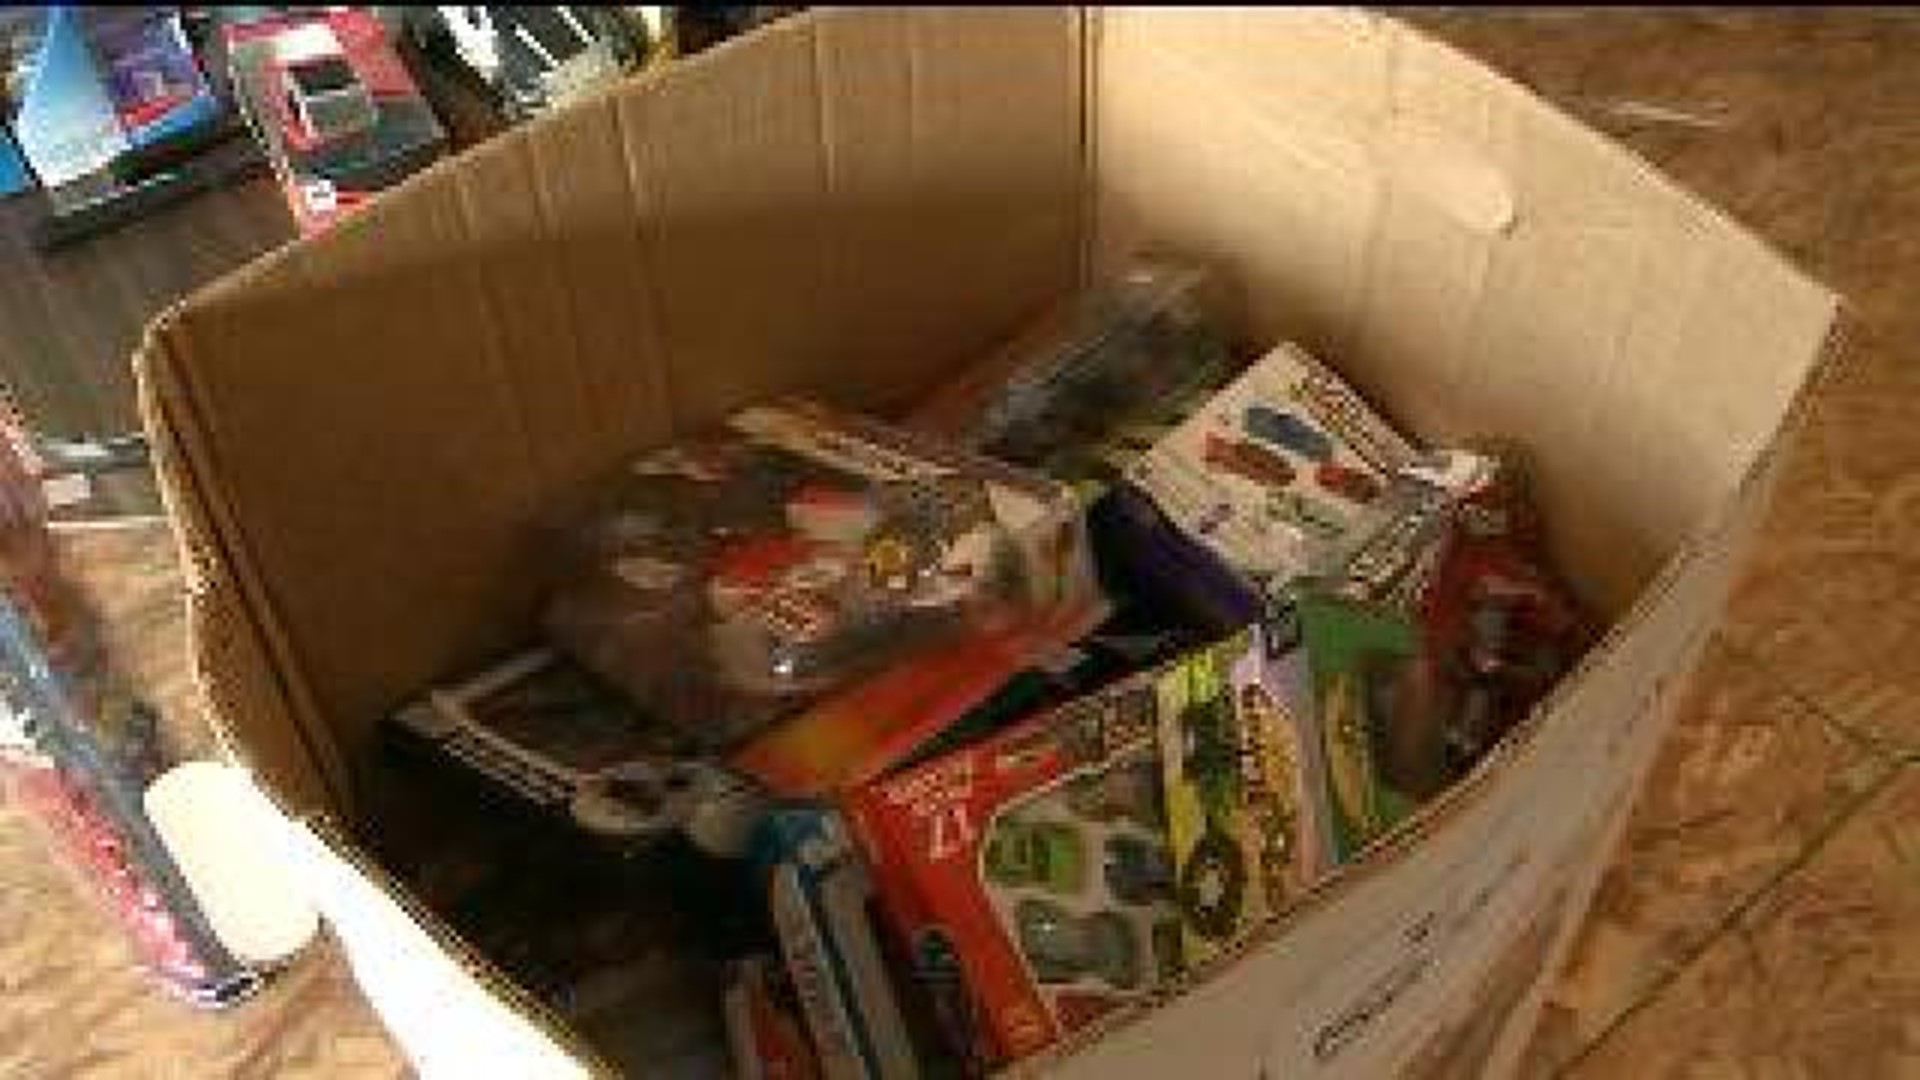 Toys For Tots in Need